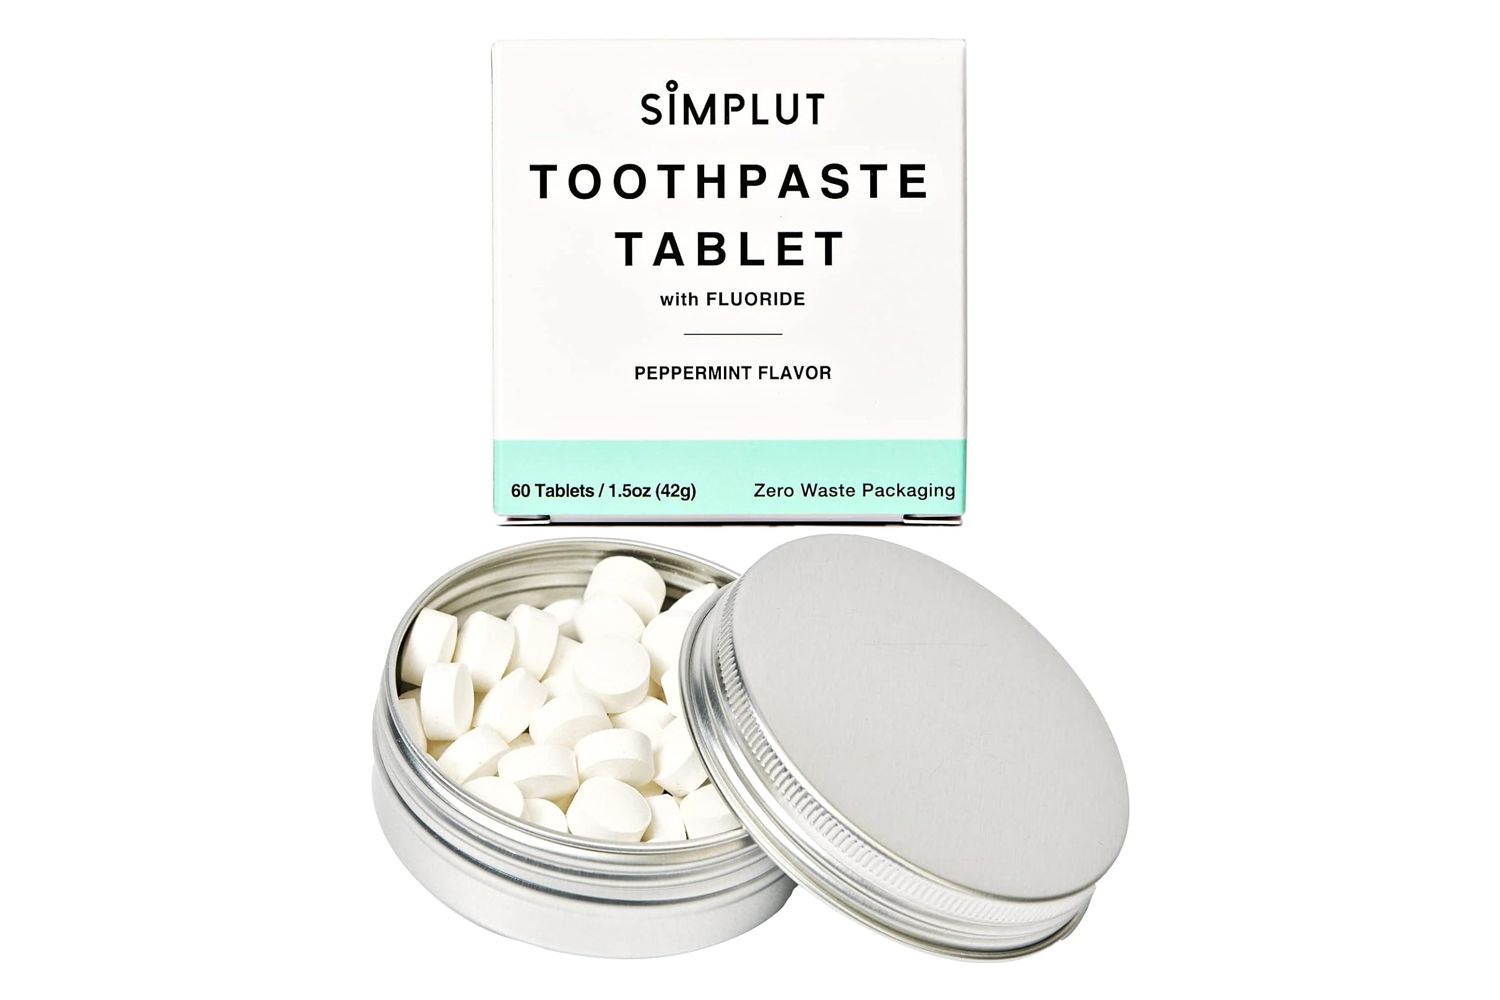 Amazon Simplut Chewable Toothpaste Tablets with Fluoride